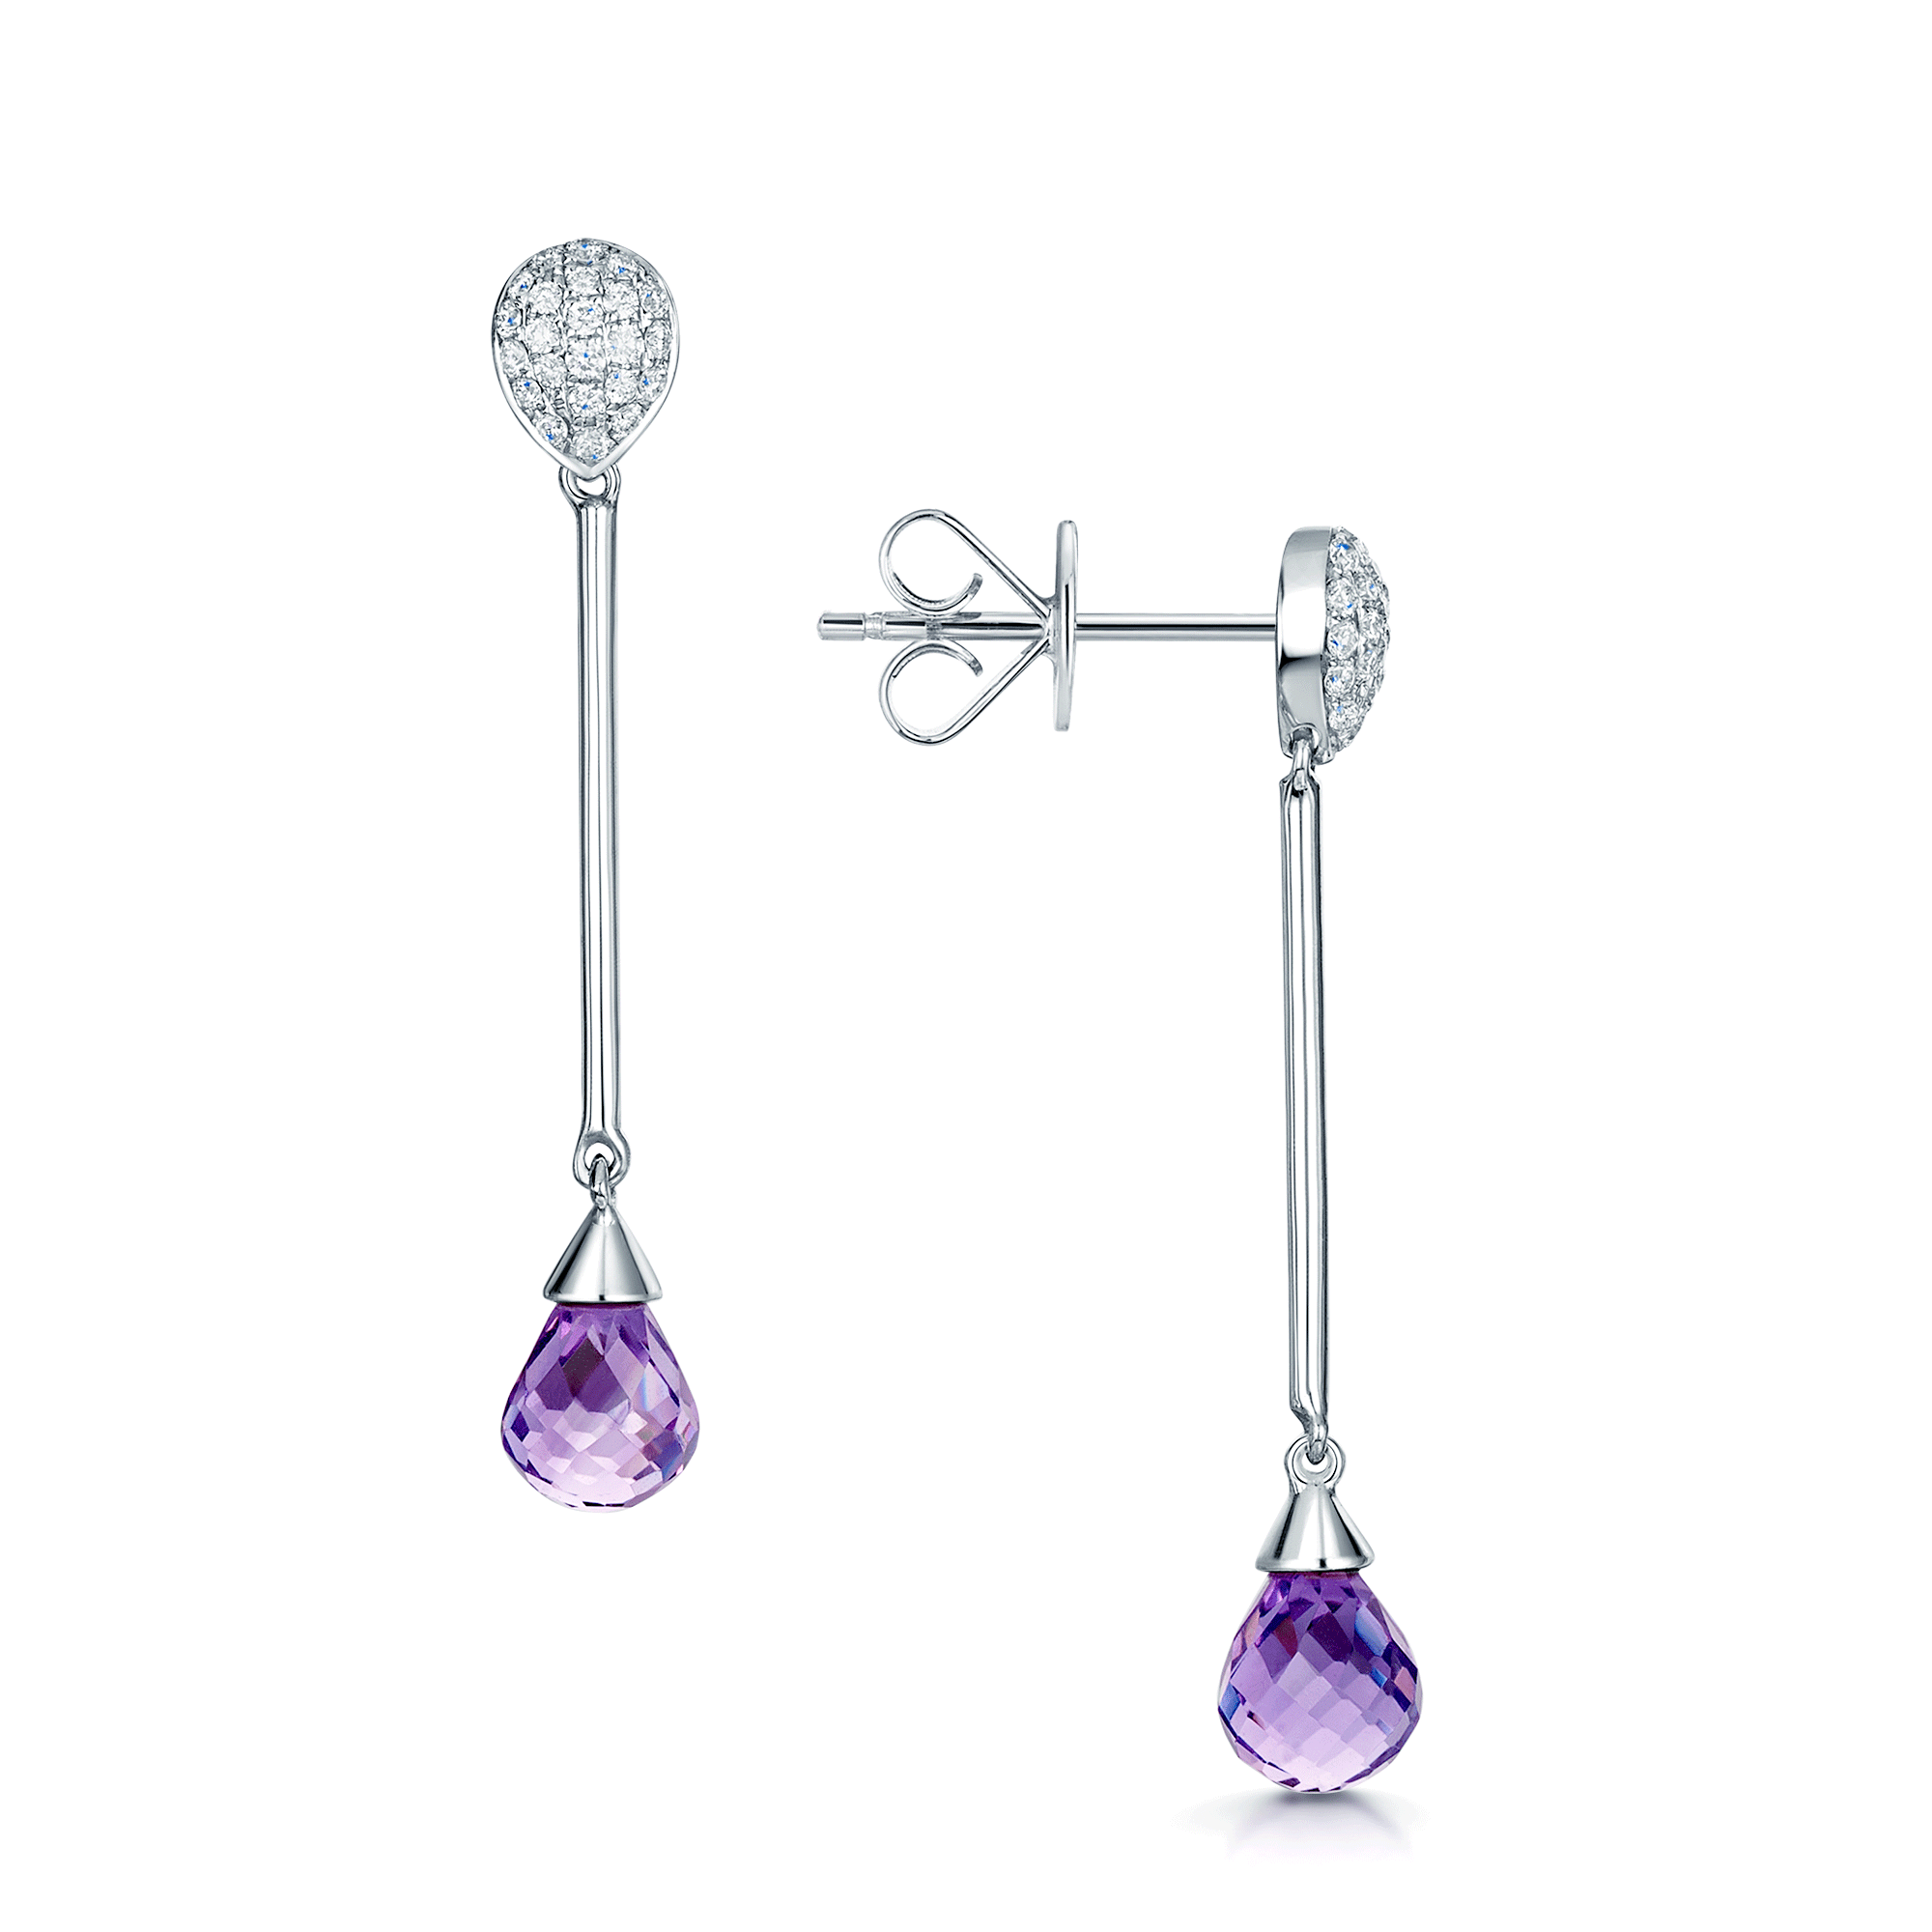 18ct White Gold Drop Briolette Cut Amethyst Drop Earrings With A Pave Diamond Stud